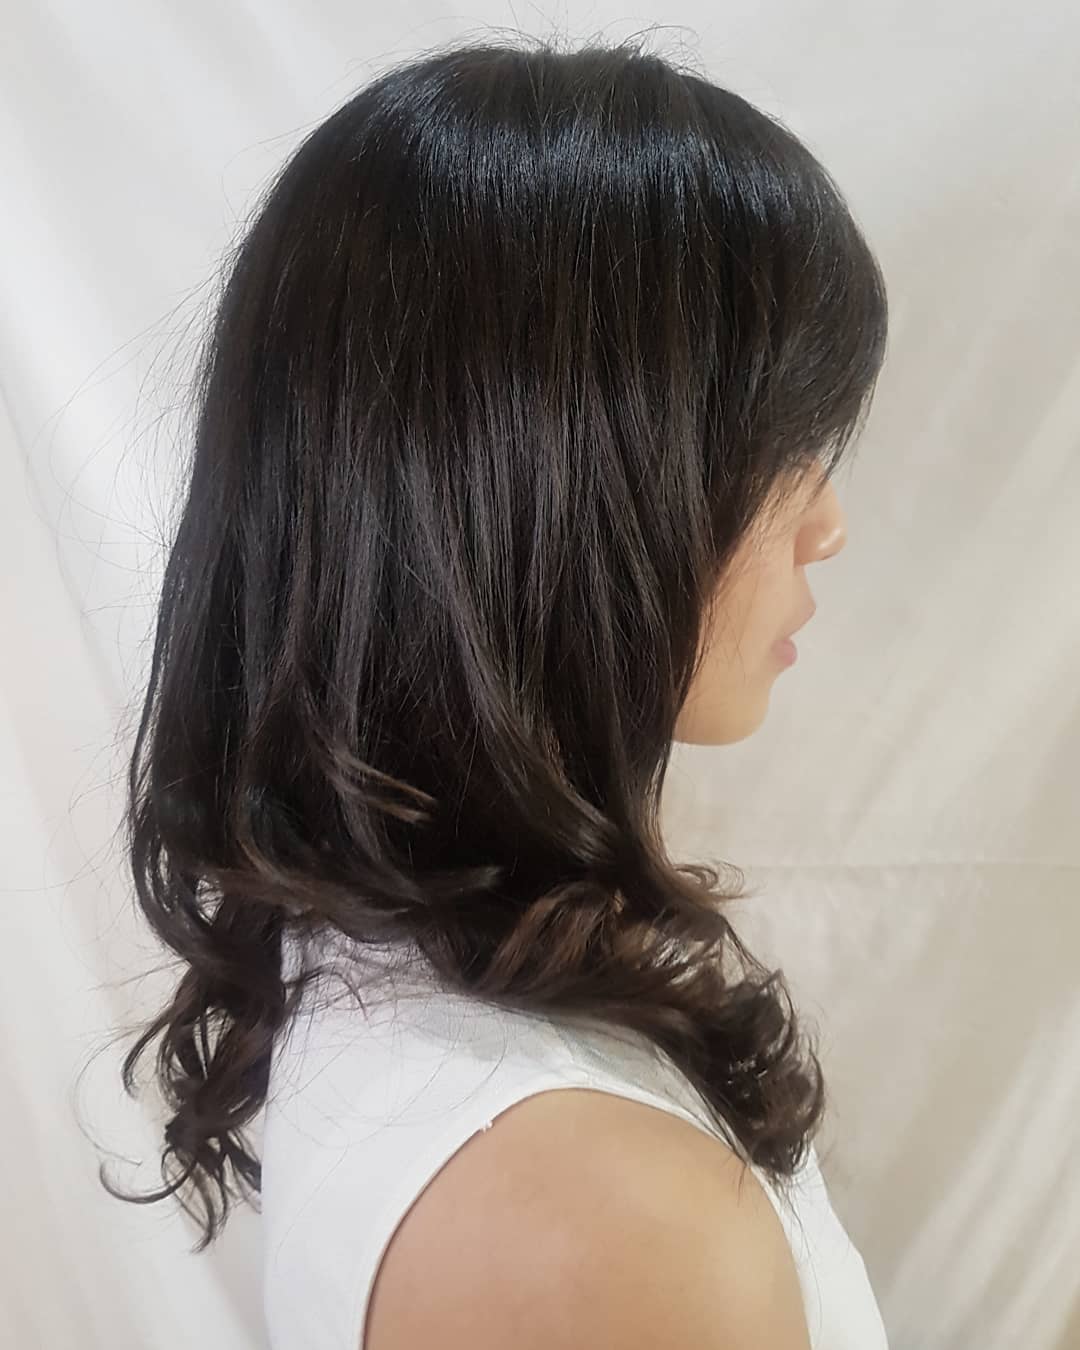 7 Amazing Blow Dry Places In Bangalore Thatll Help You Nail That HairFlip   So Bangalore